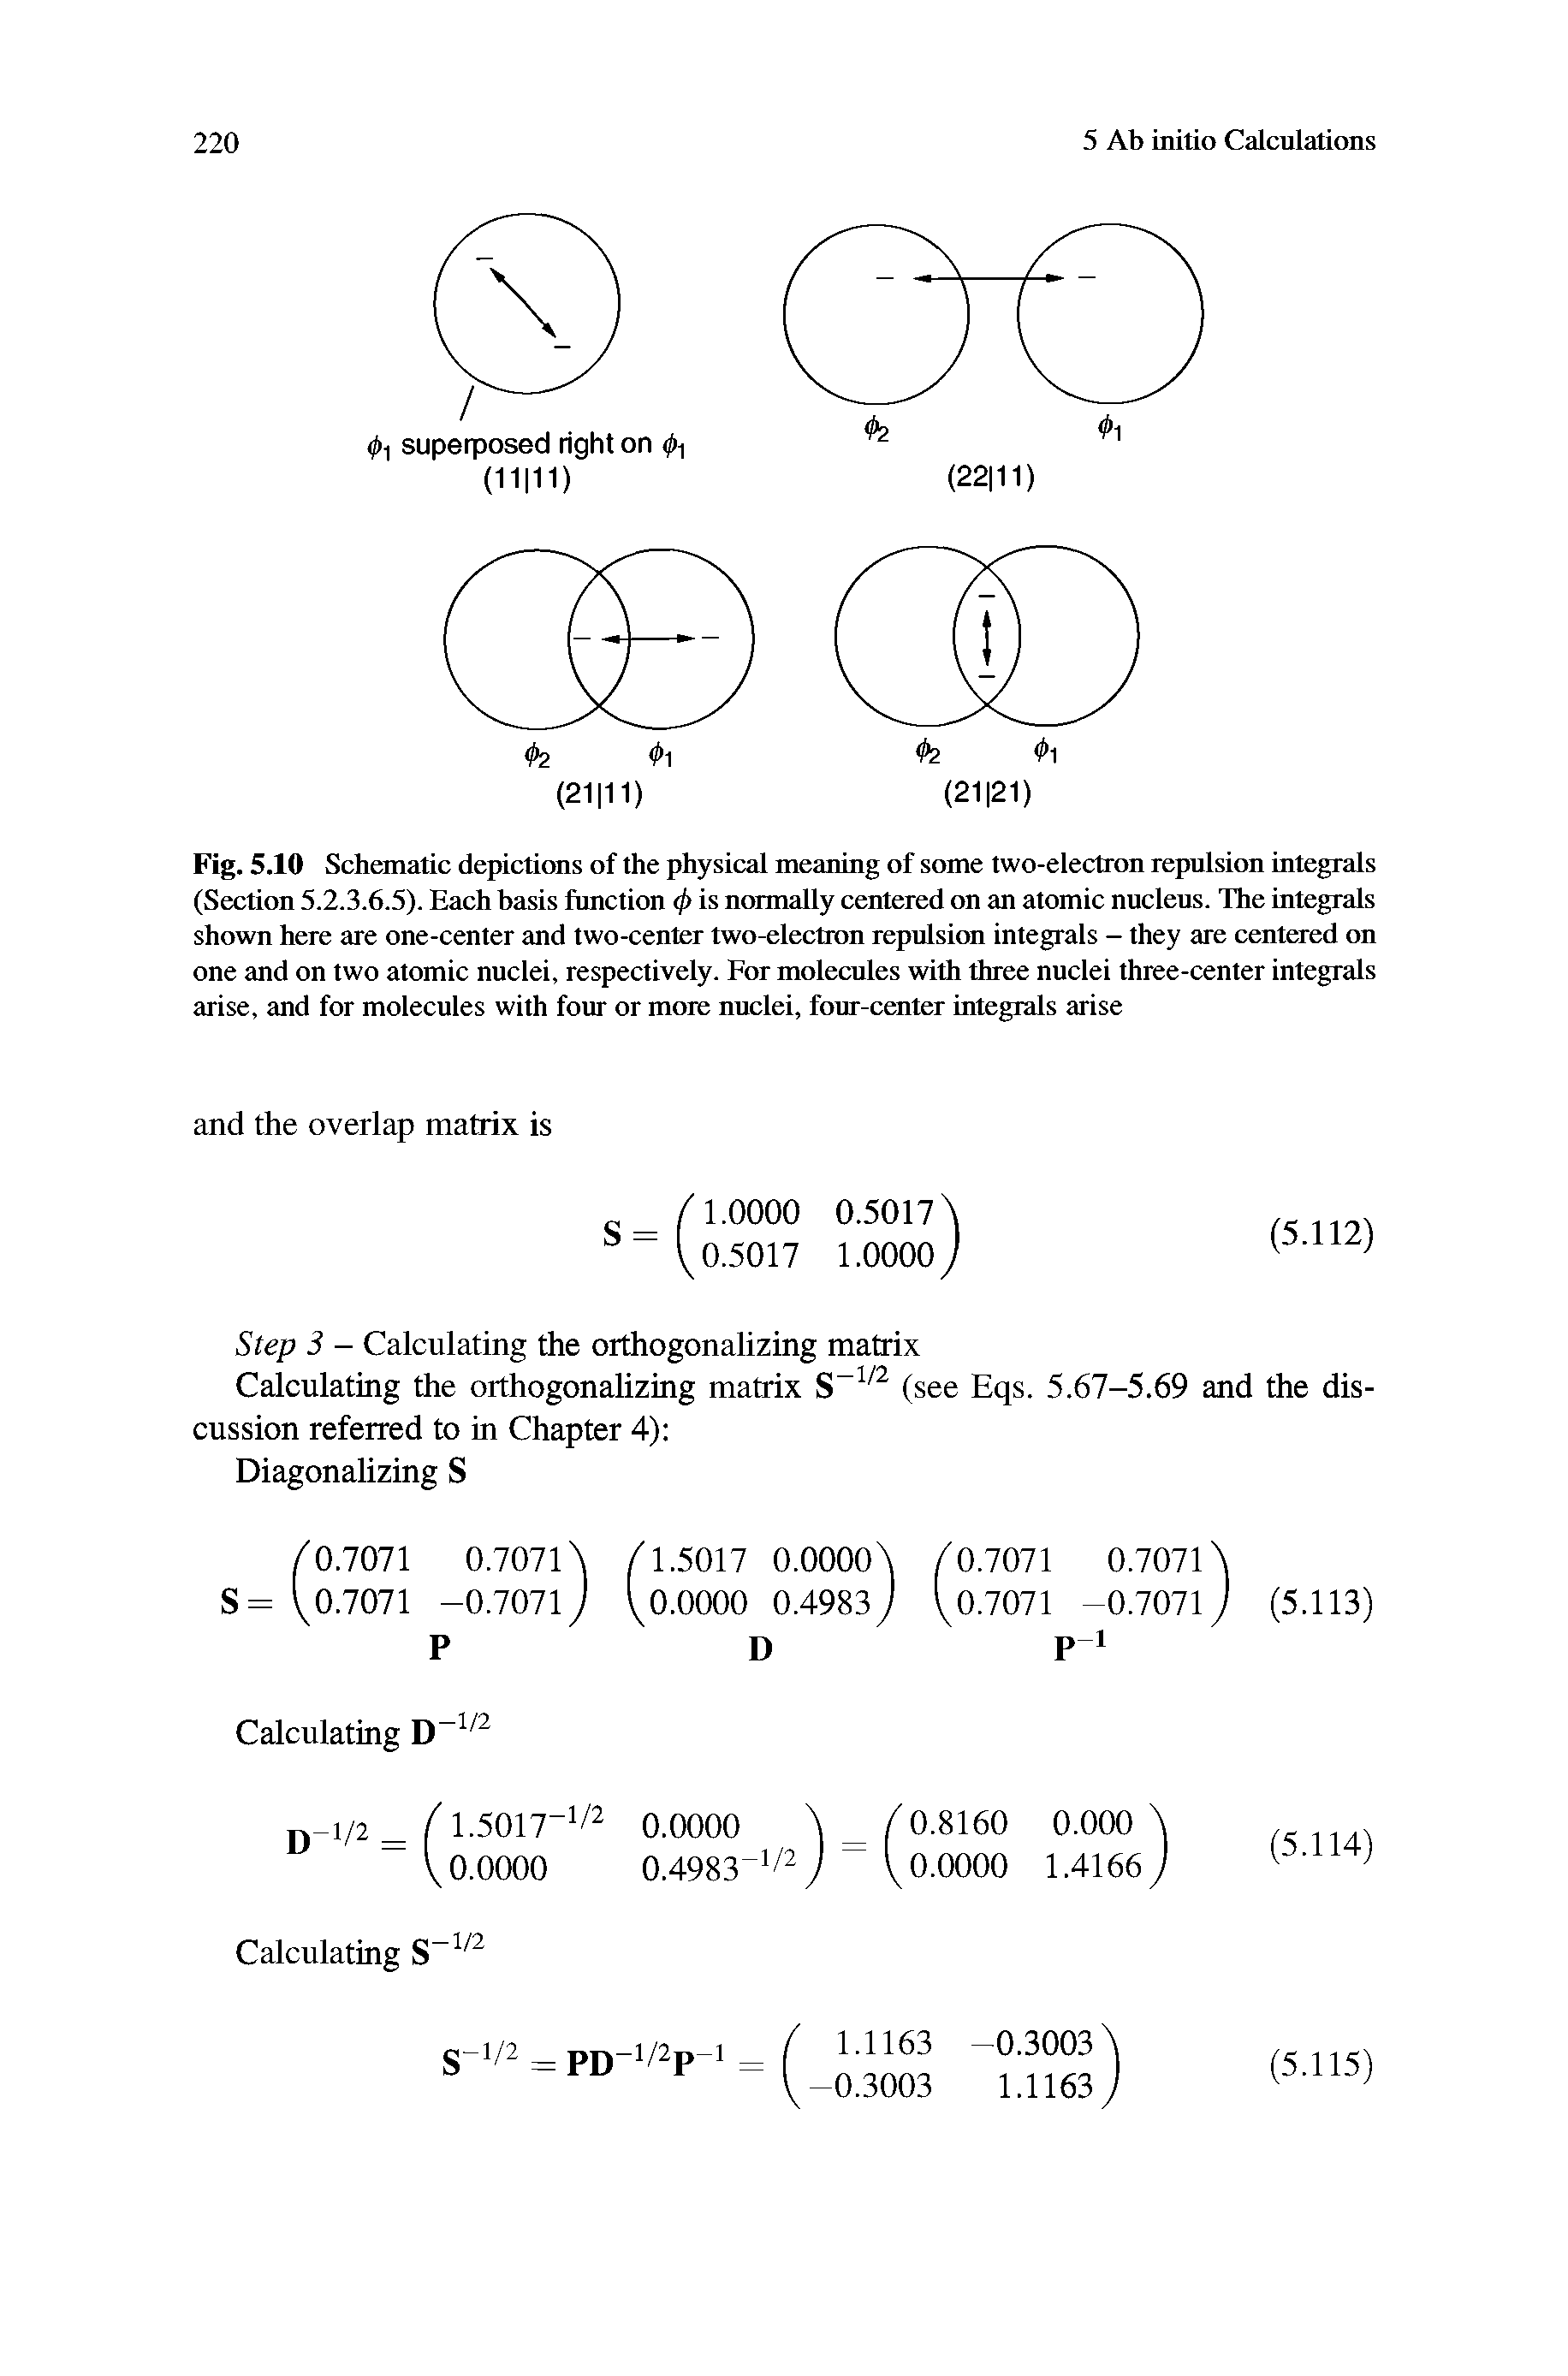 Fig. 5.10 Schematic depictions of the physical meaning of some two-electron repulsion integrals (Section 5.2.3.6.5). Each basis function (j> is normally centered on an atomic nucleus. The integrals shown here are one-center and two-center two-electron repulsion integrals - they are centered on one and on two atomic nuclei, respectively. For molecules with three nuclei three-center integrals arise, and for molecules with four or more nuclei, four-center integrals arise...